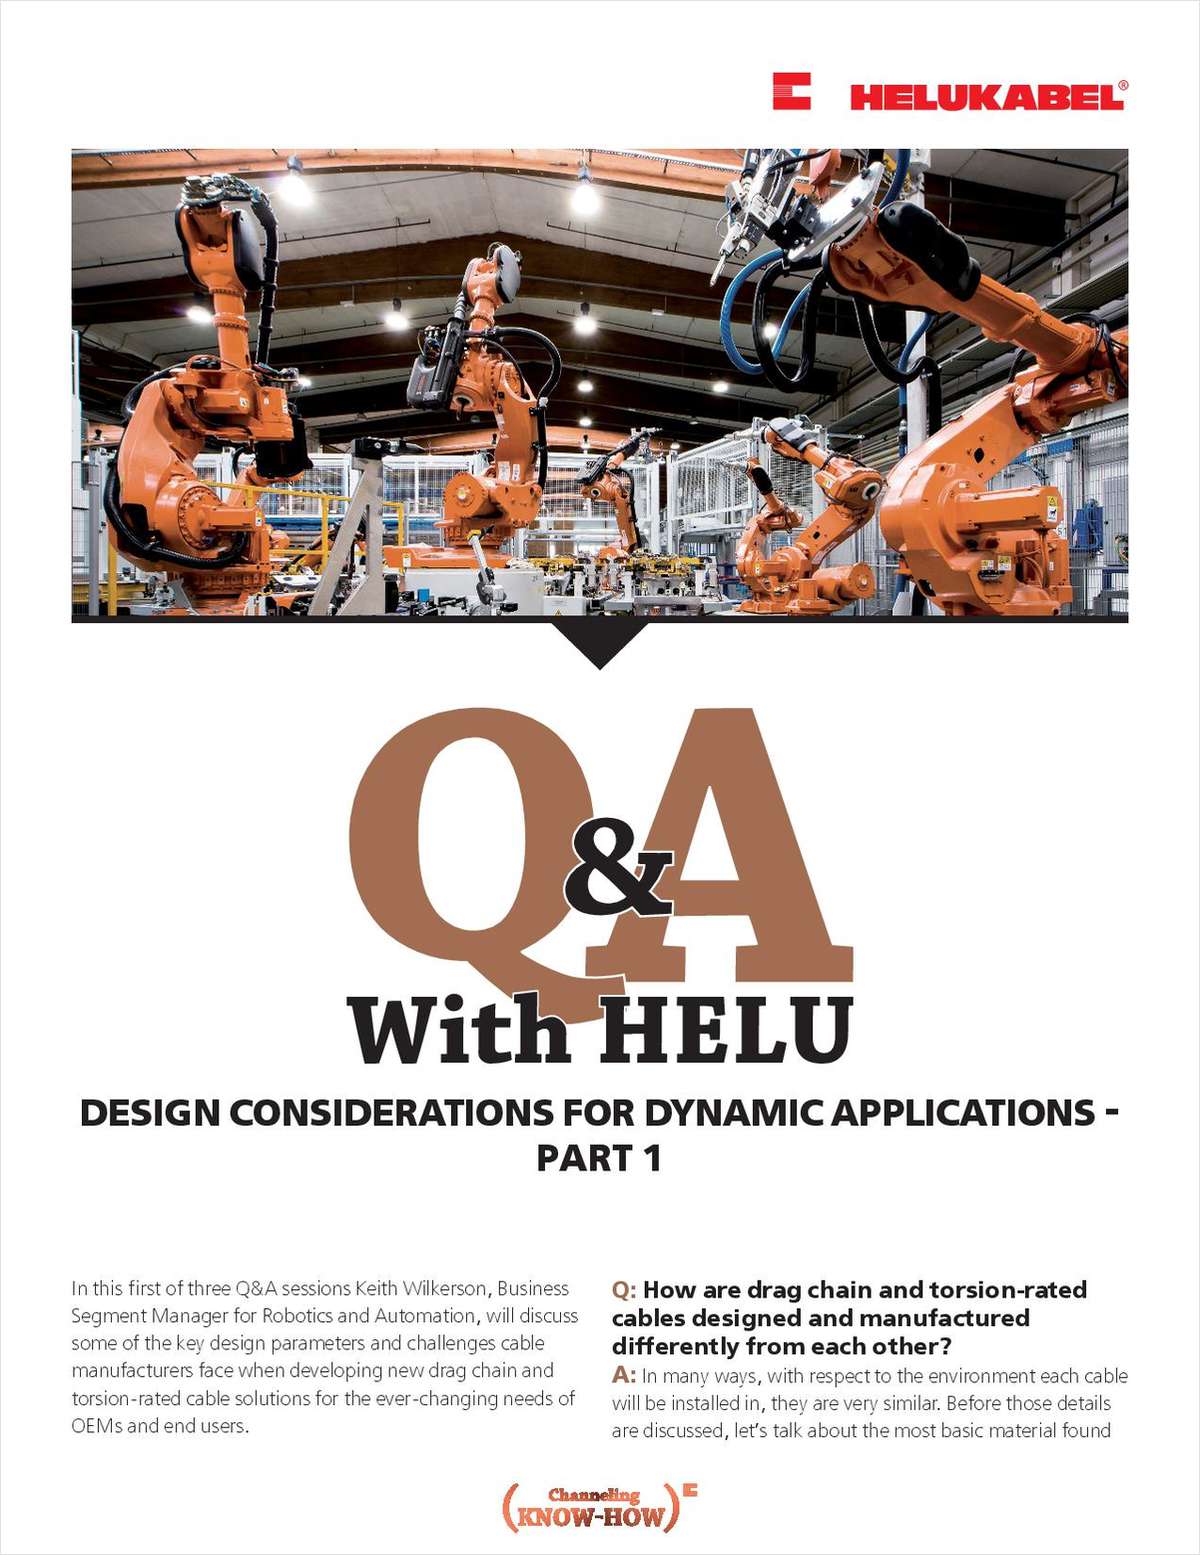 Q&A With HELU: Design Considerations for Dynamic Applications